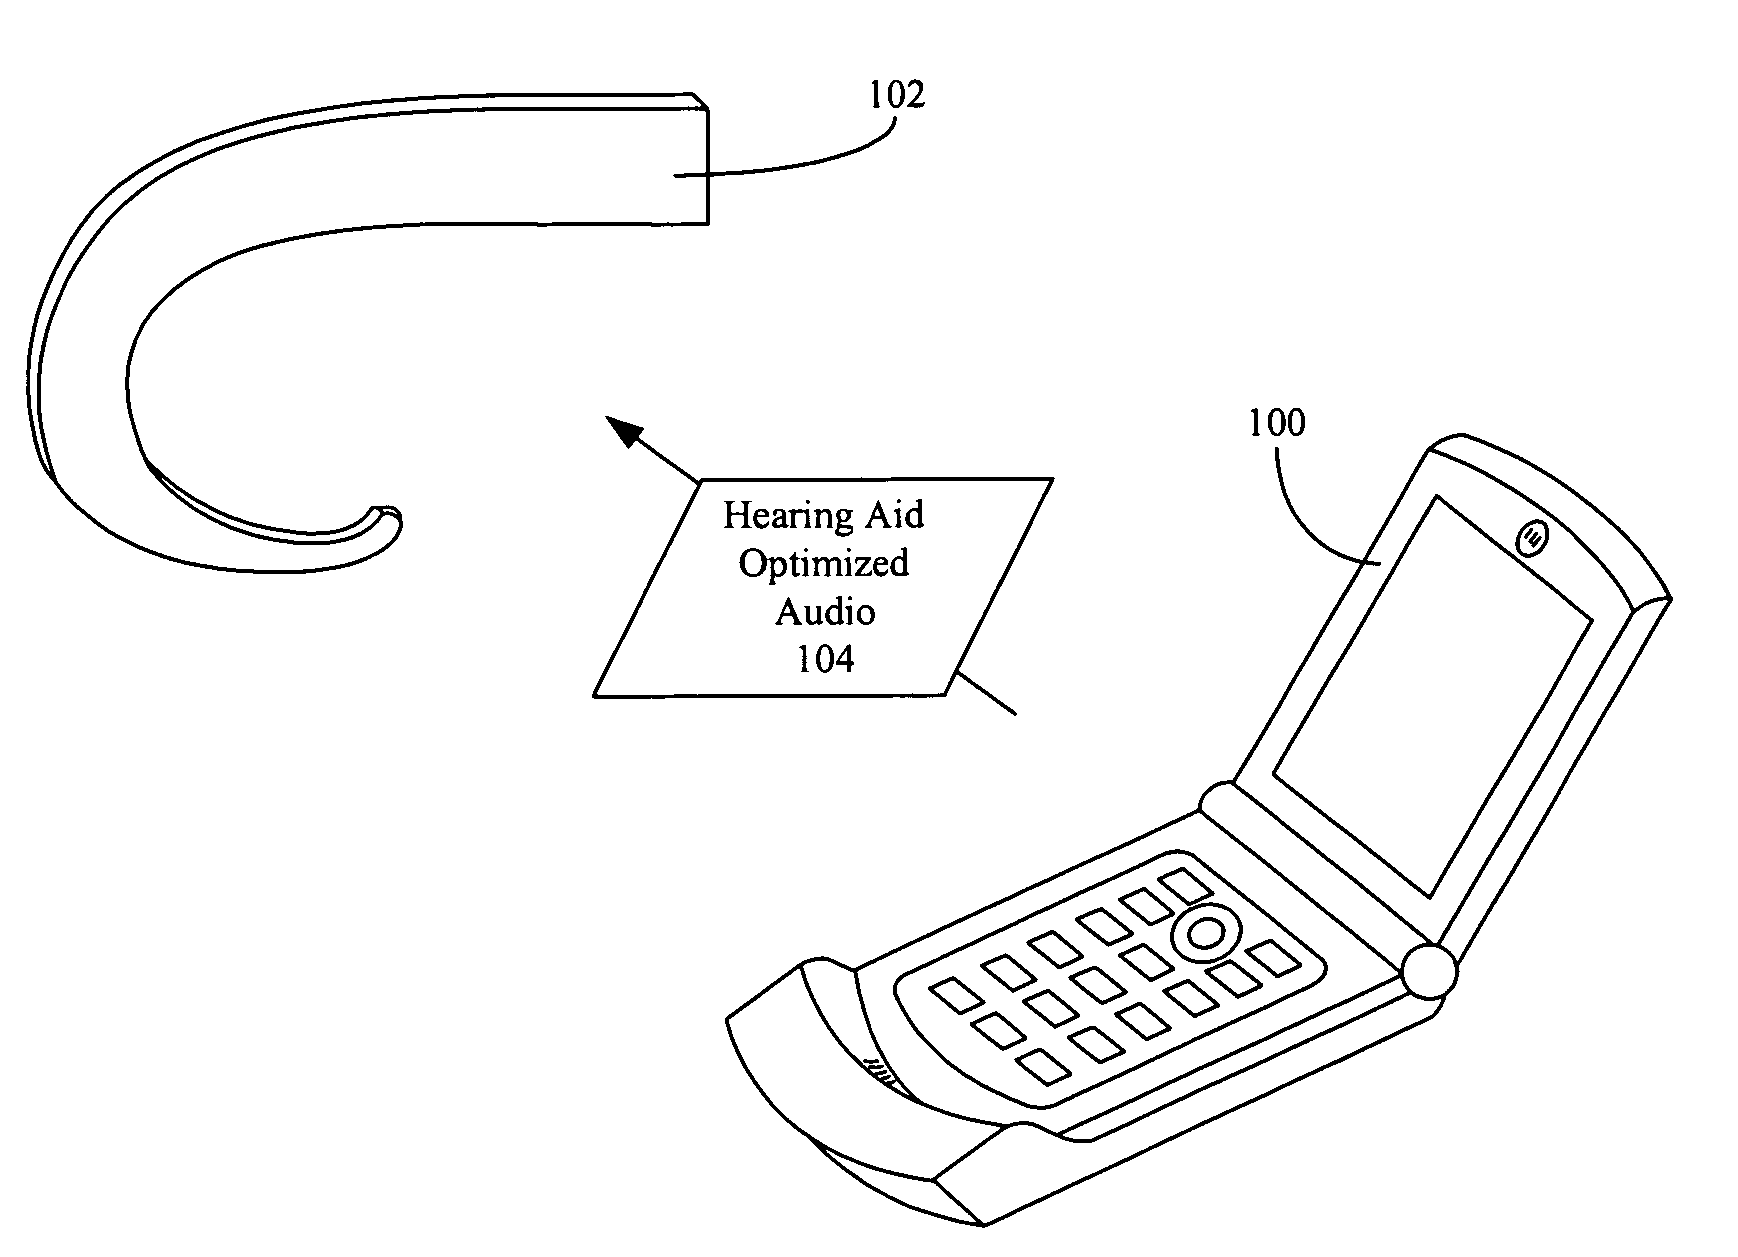 Hearing aid compatibility mode switching for a mobile station